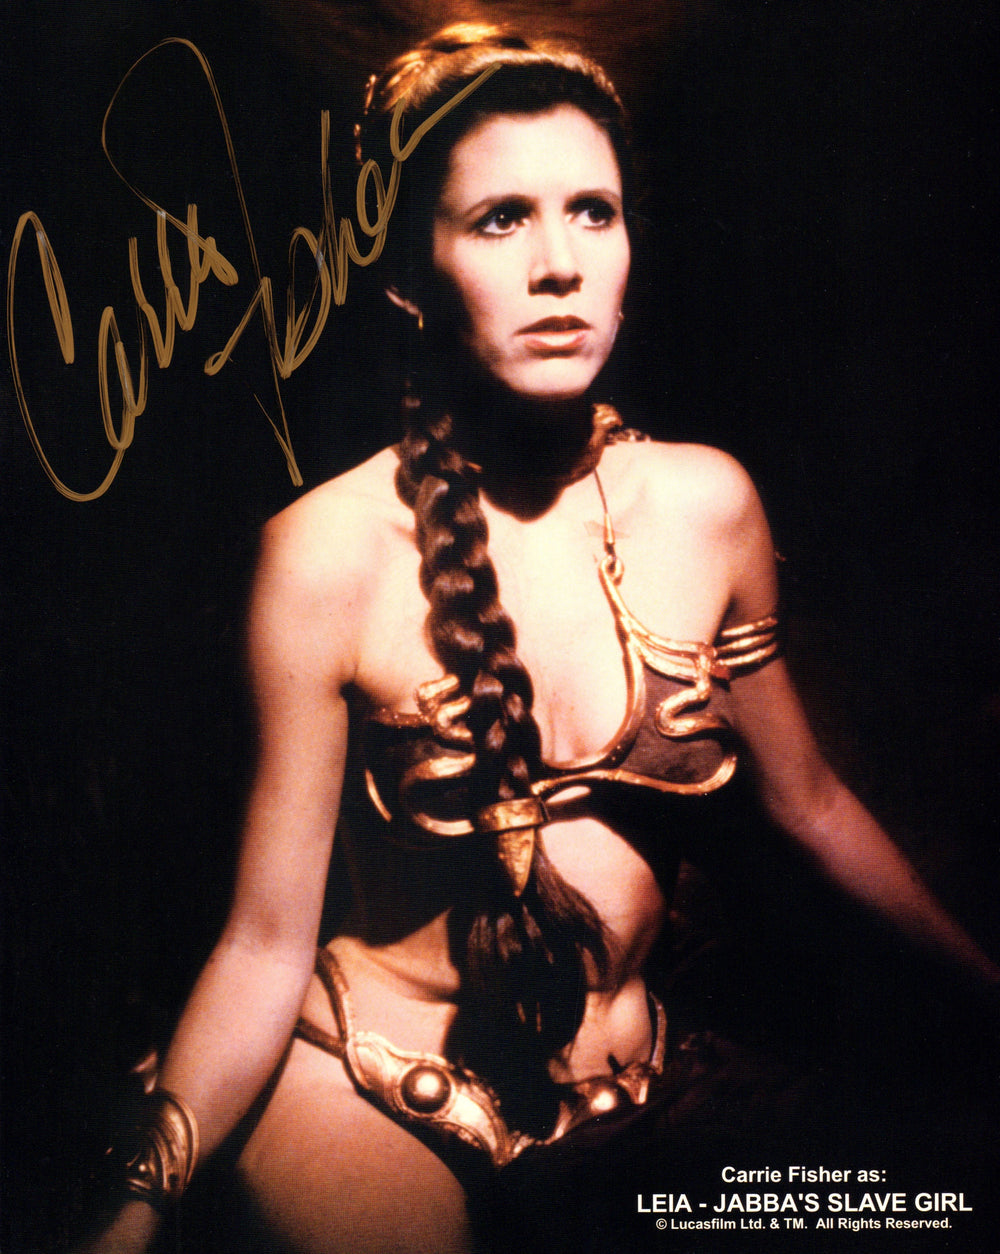 Carrie Fisher Princess Leia Star Wars: Return of the Jedi Signed 8x10 Photo